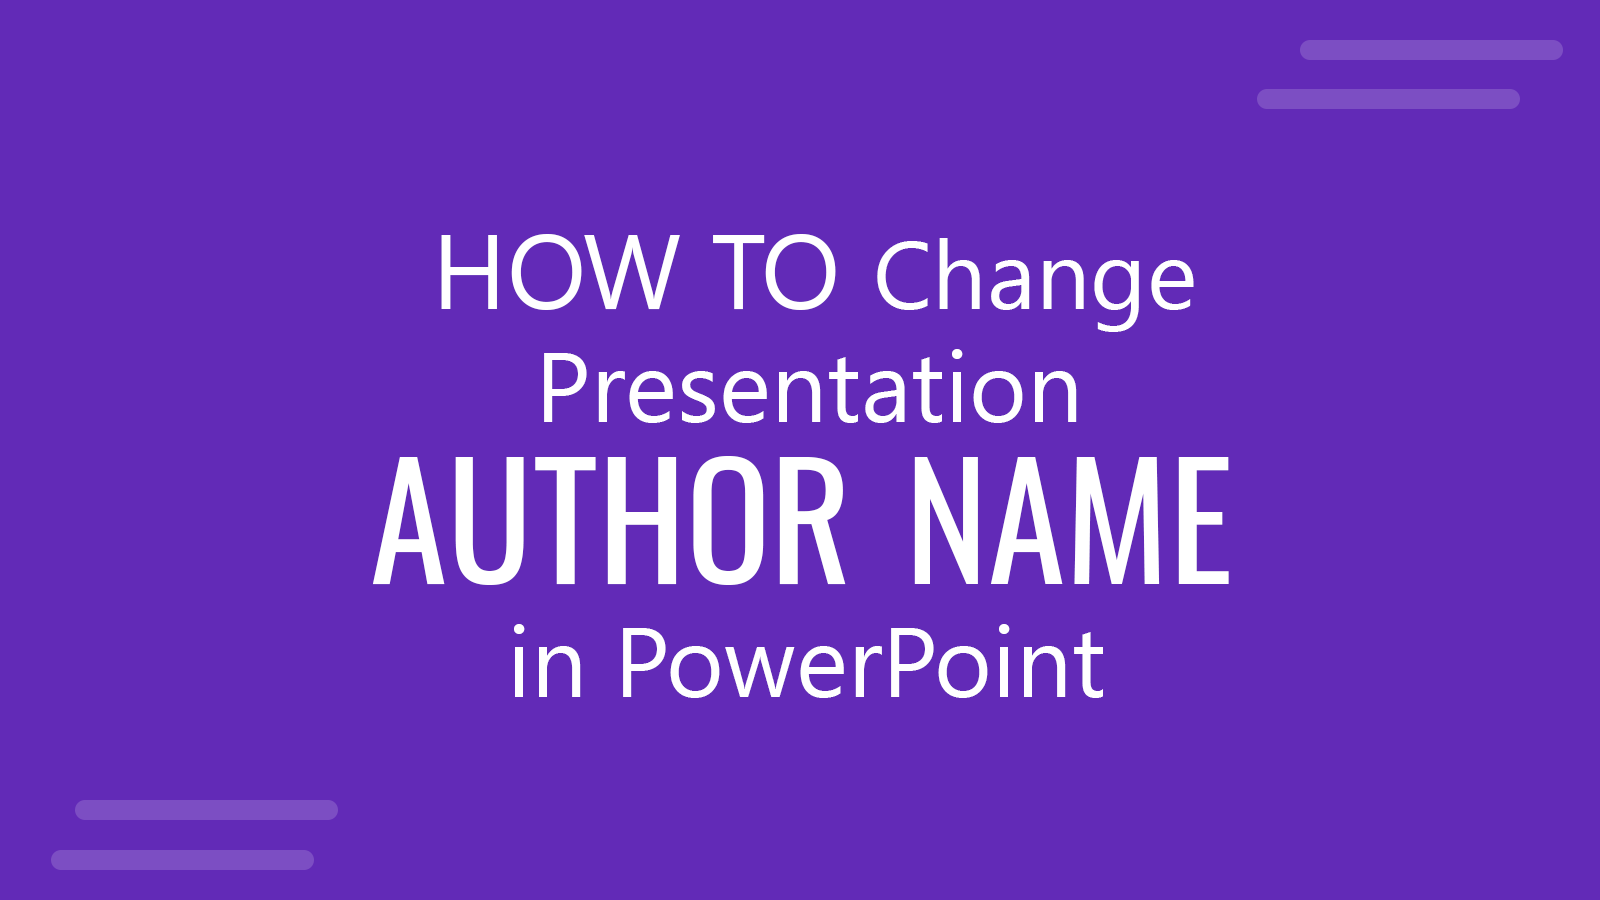 How to Change the Presentation Author Name